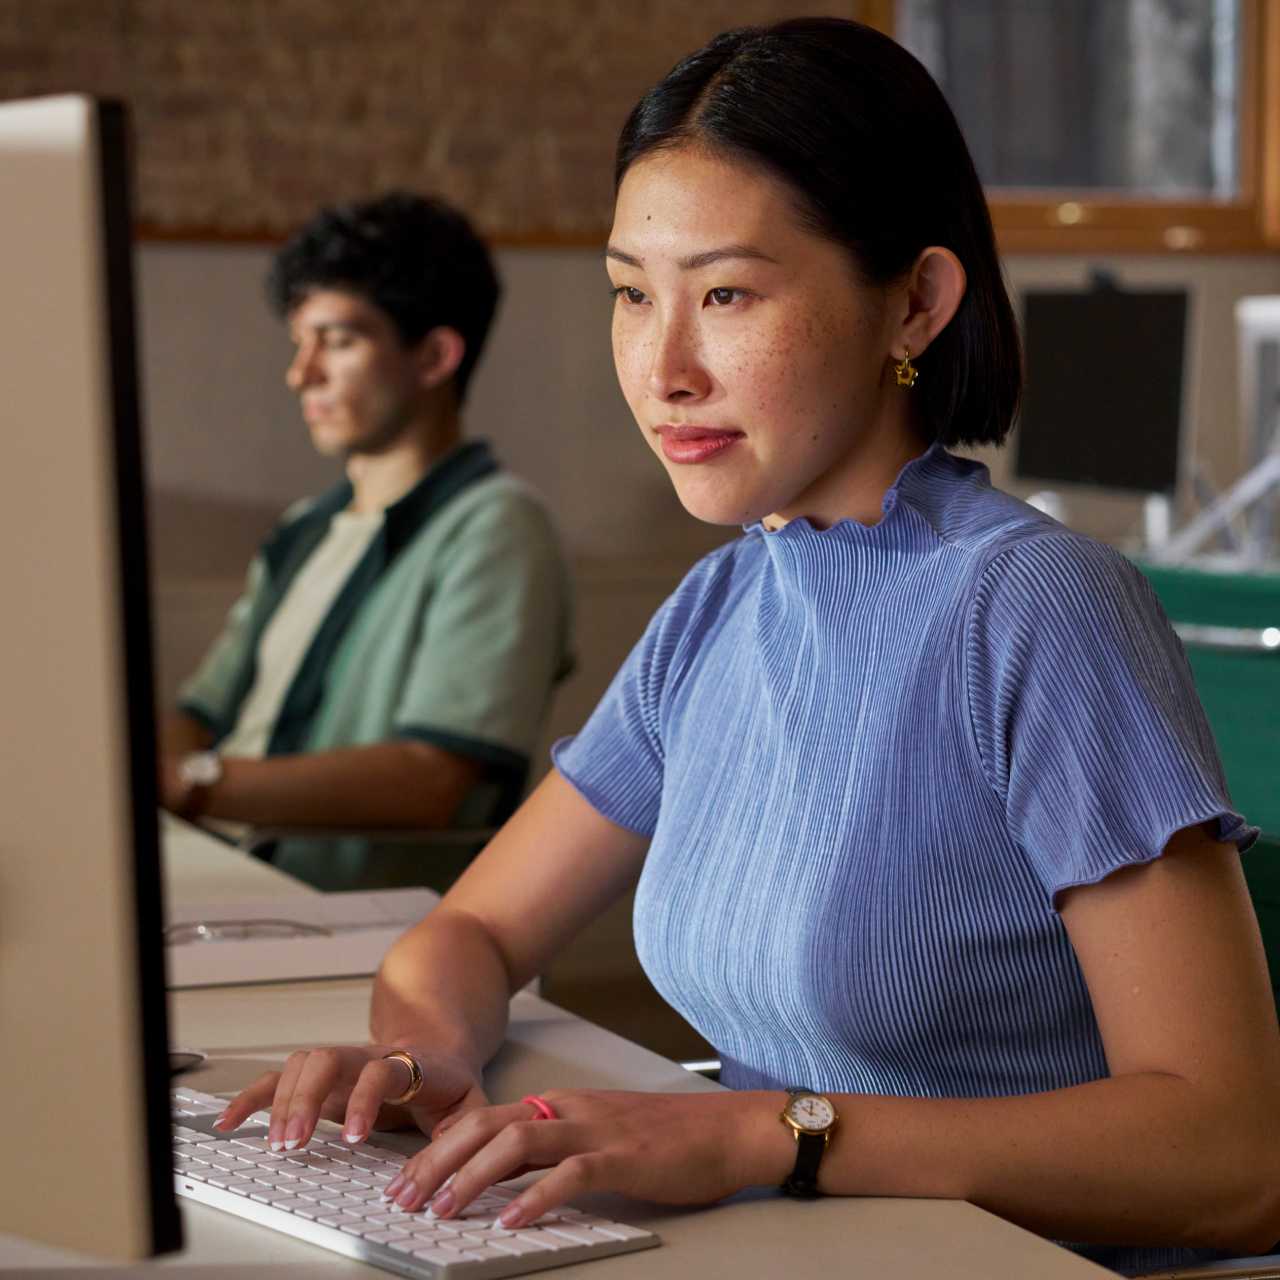 A woman working on her computer next to a coworker.